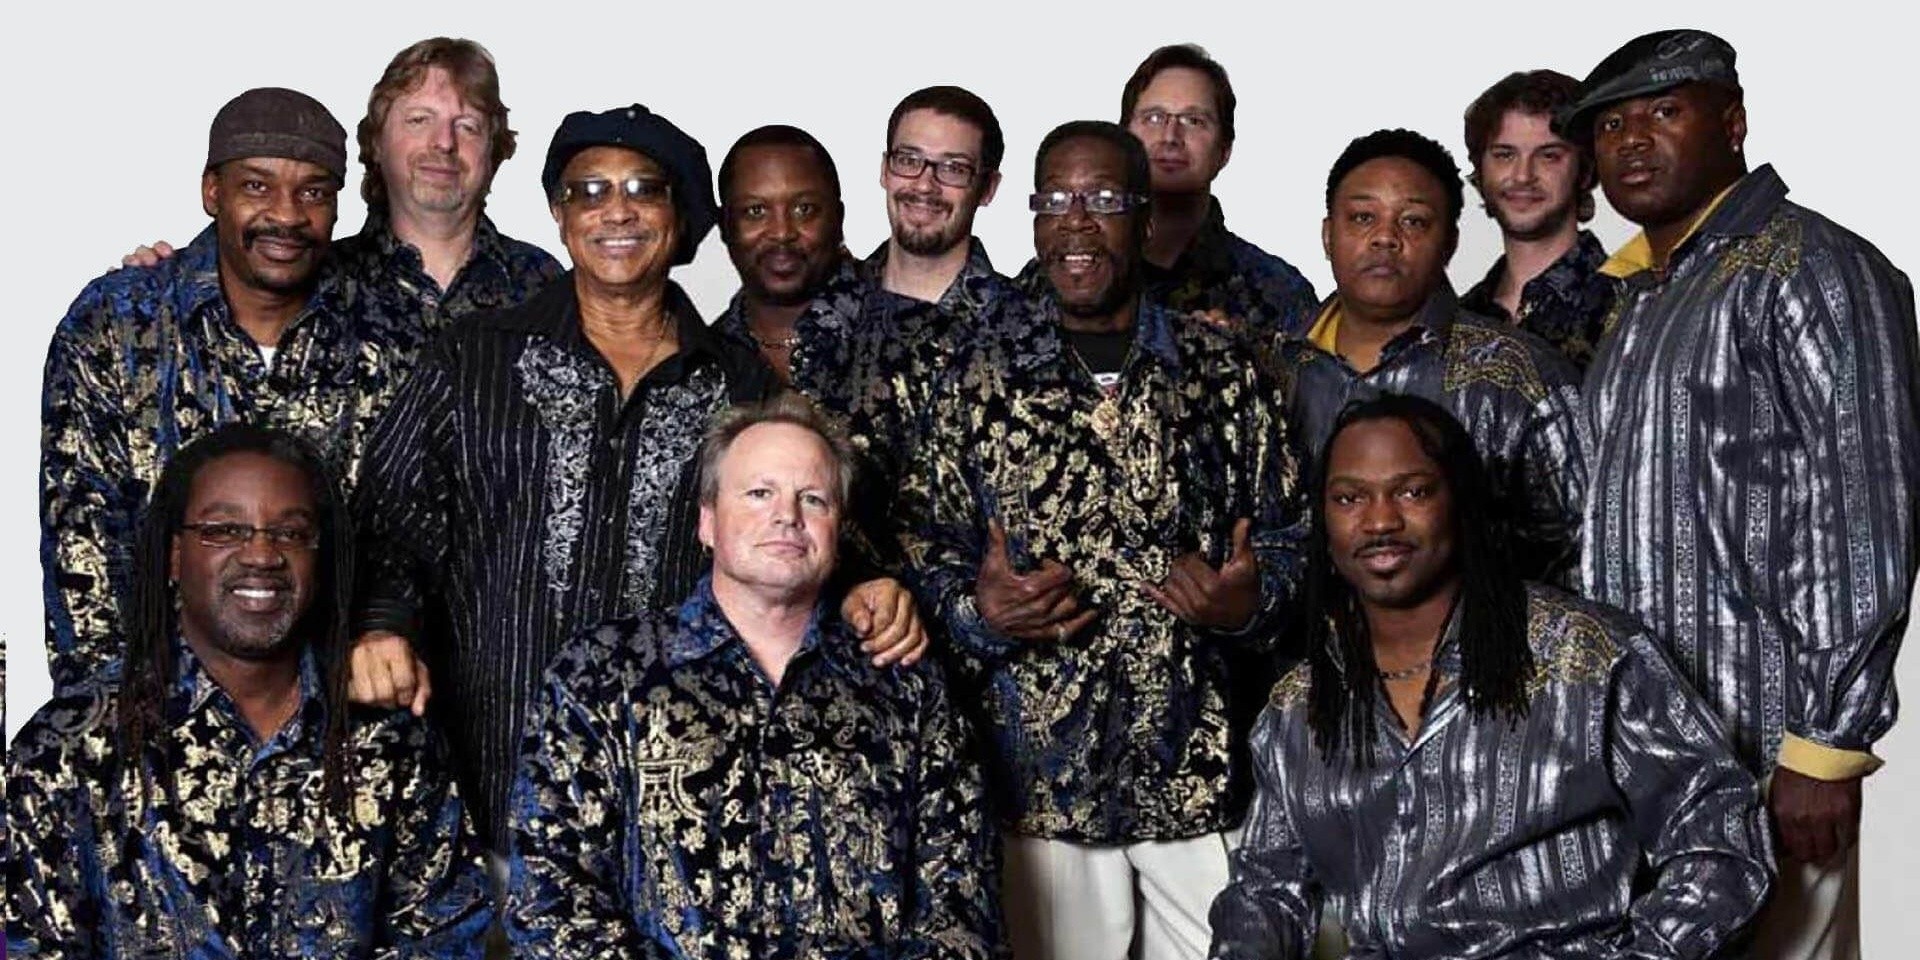 Al McKay's Earth, Wind & Fire Experience to perform in Singapore 